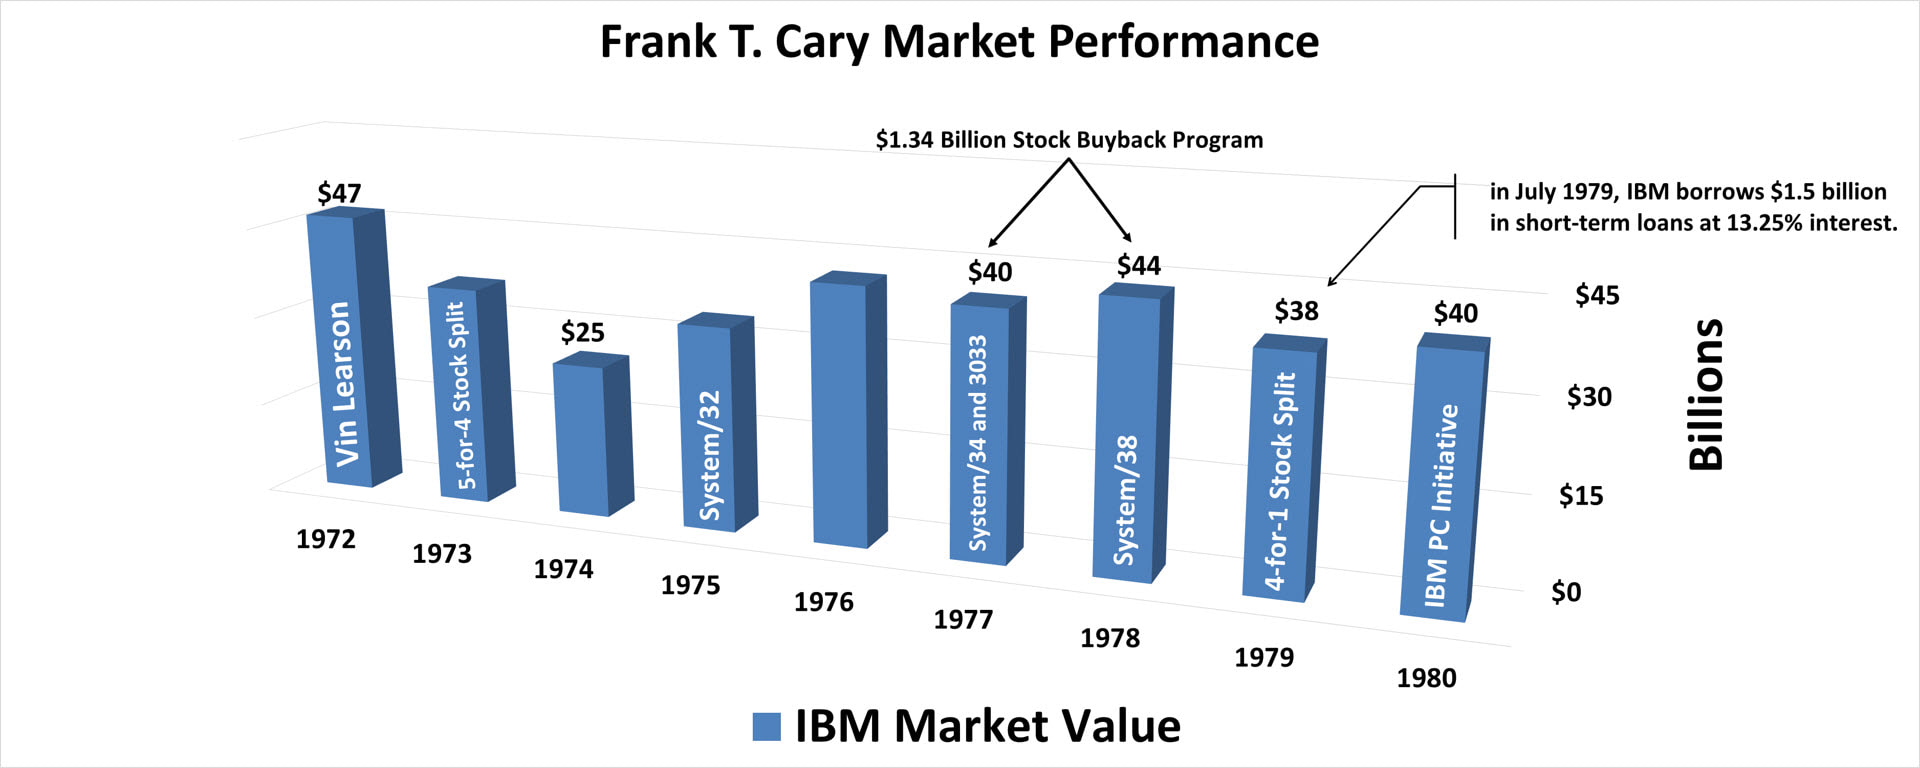 A color bar chart showing IBM's yearly market value from 1972 to 1980 for Chief Executive Officer (CEO) Frank T. Cary.